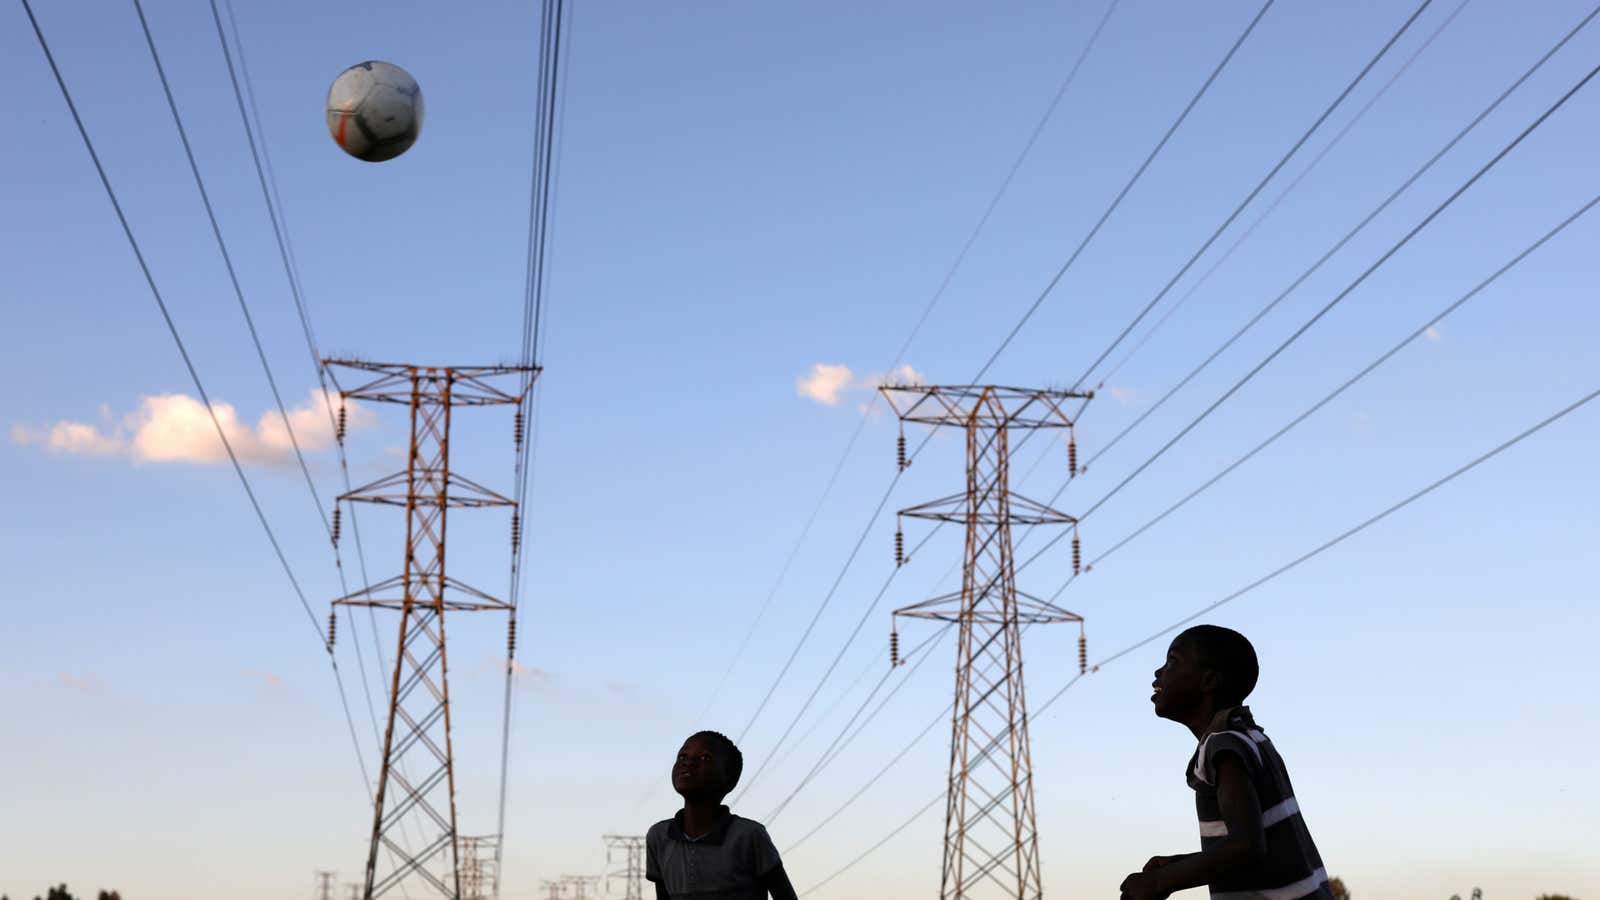 600 million people in Africa still lack access to electricity, and utilities are in dire straits.